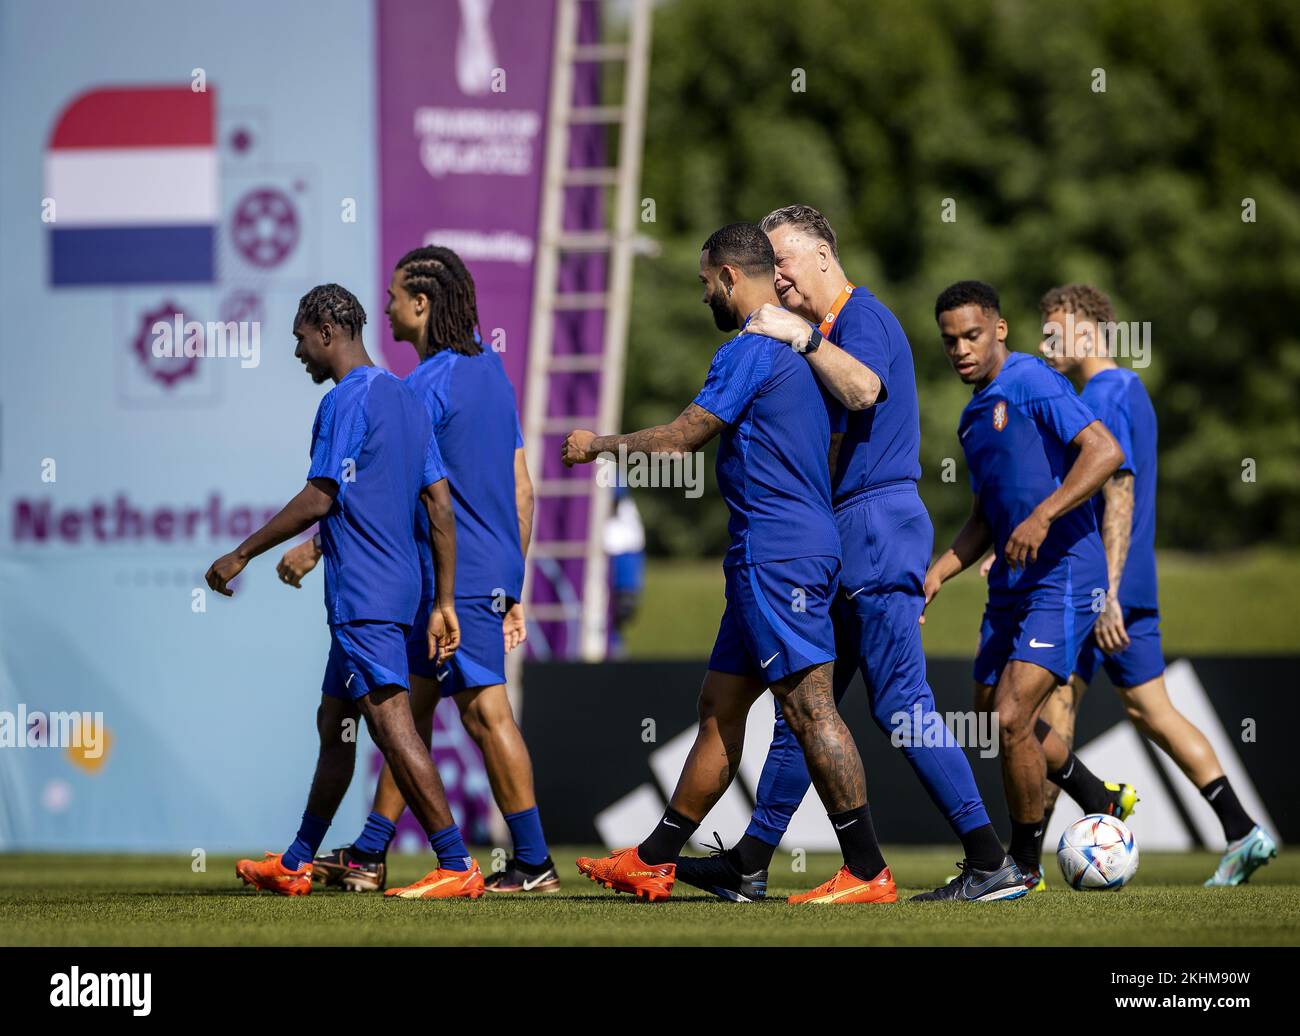 DOHA - Memphis Depay of Holland and Holland coach Louis van Gaal during a training session of the Dutch national team at the Qatar University training complex on November 24, 2022 in Doha, Qatar. The Dutch national team is preparing for the World Cup match against Ecuador. ANP KOEN VAN WEEL Stock Photo